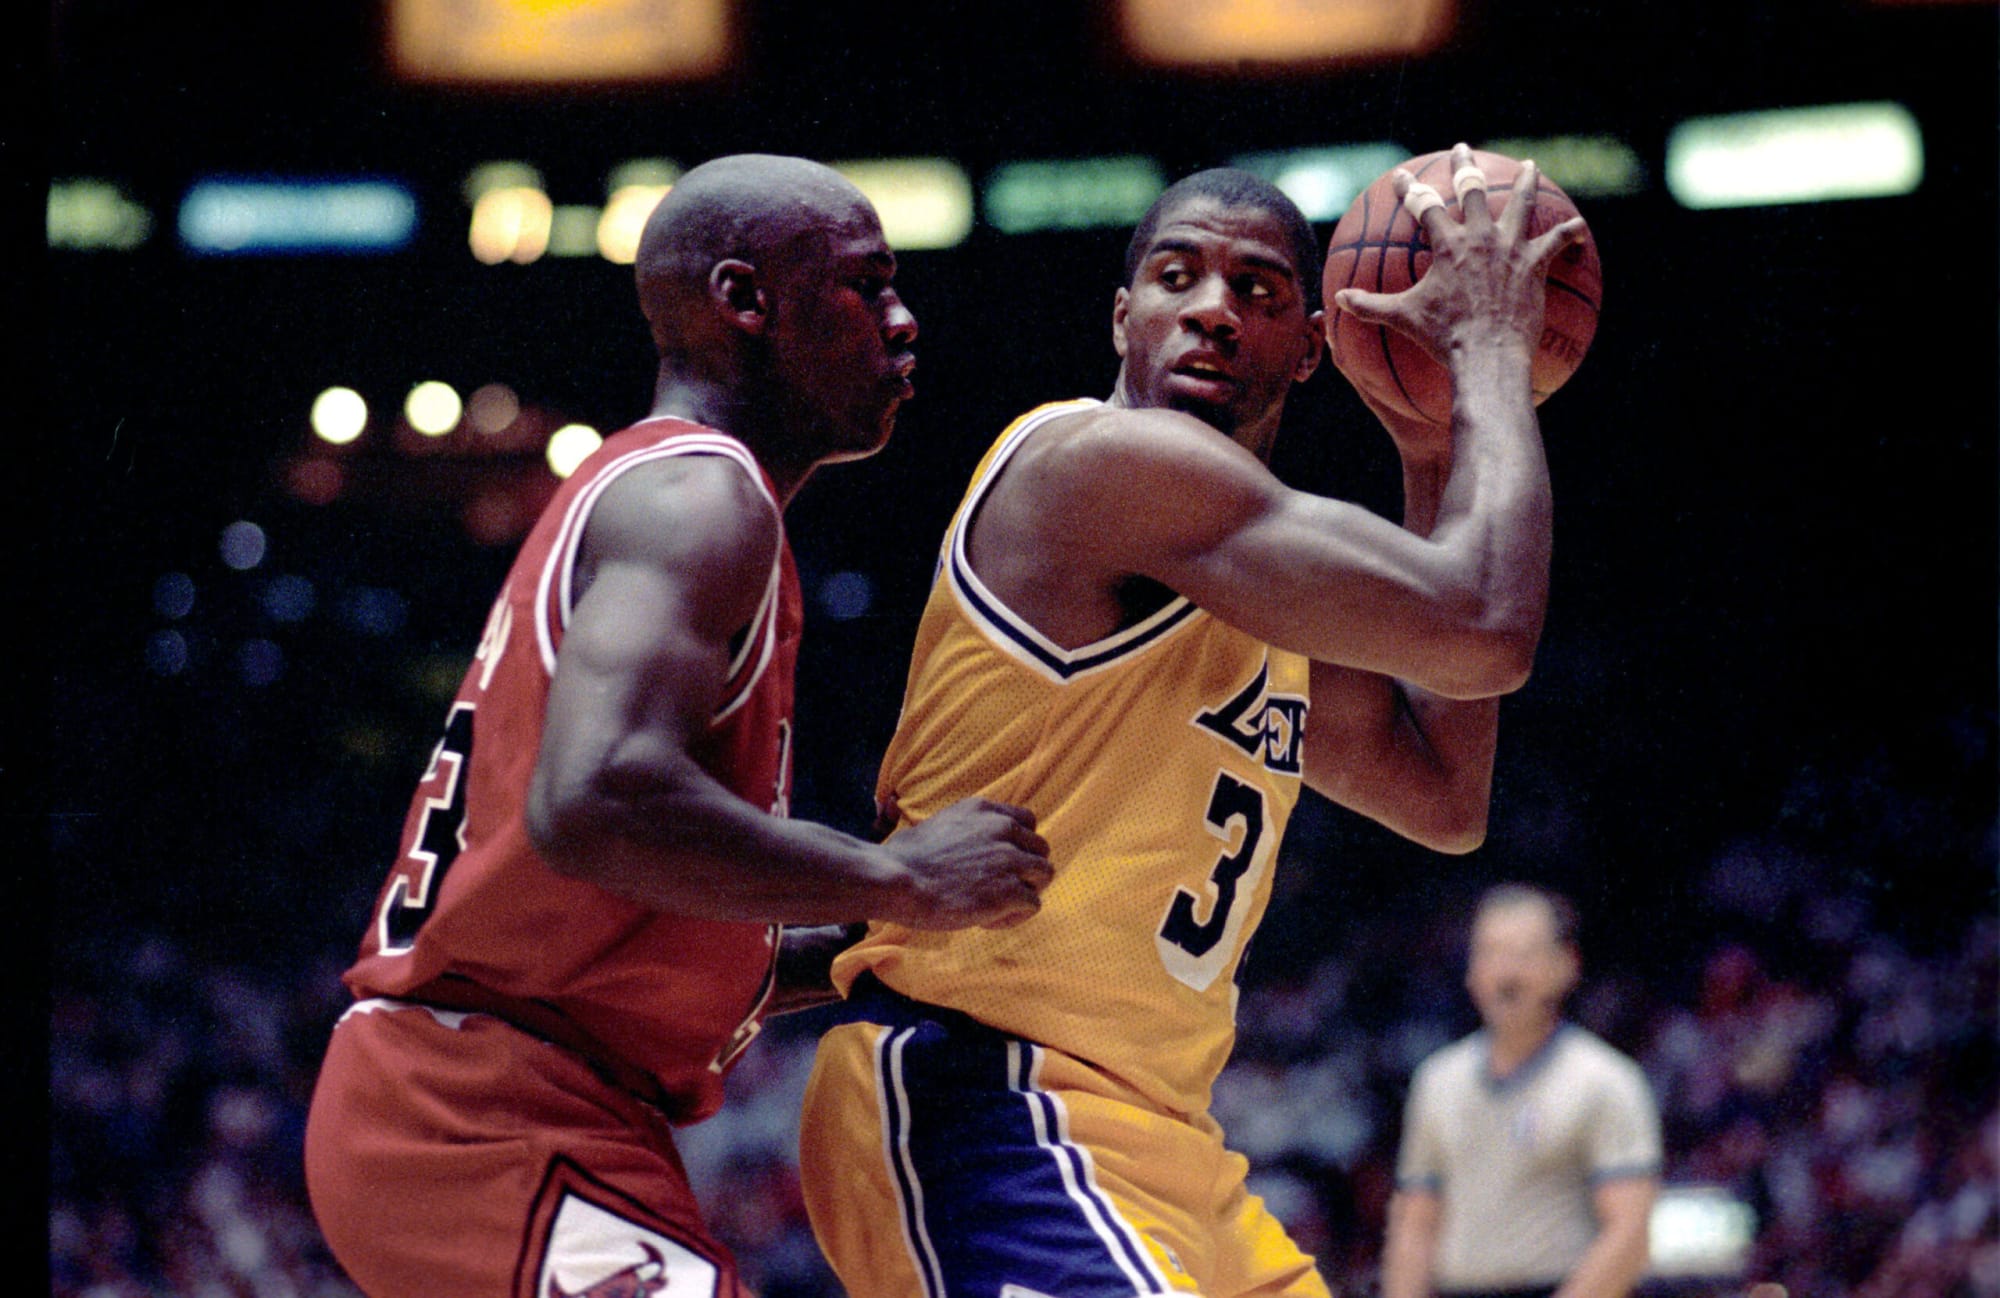 The 50 greatest players in NBA history, ranked by win shares